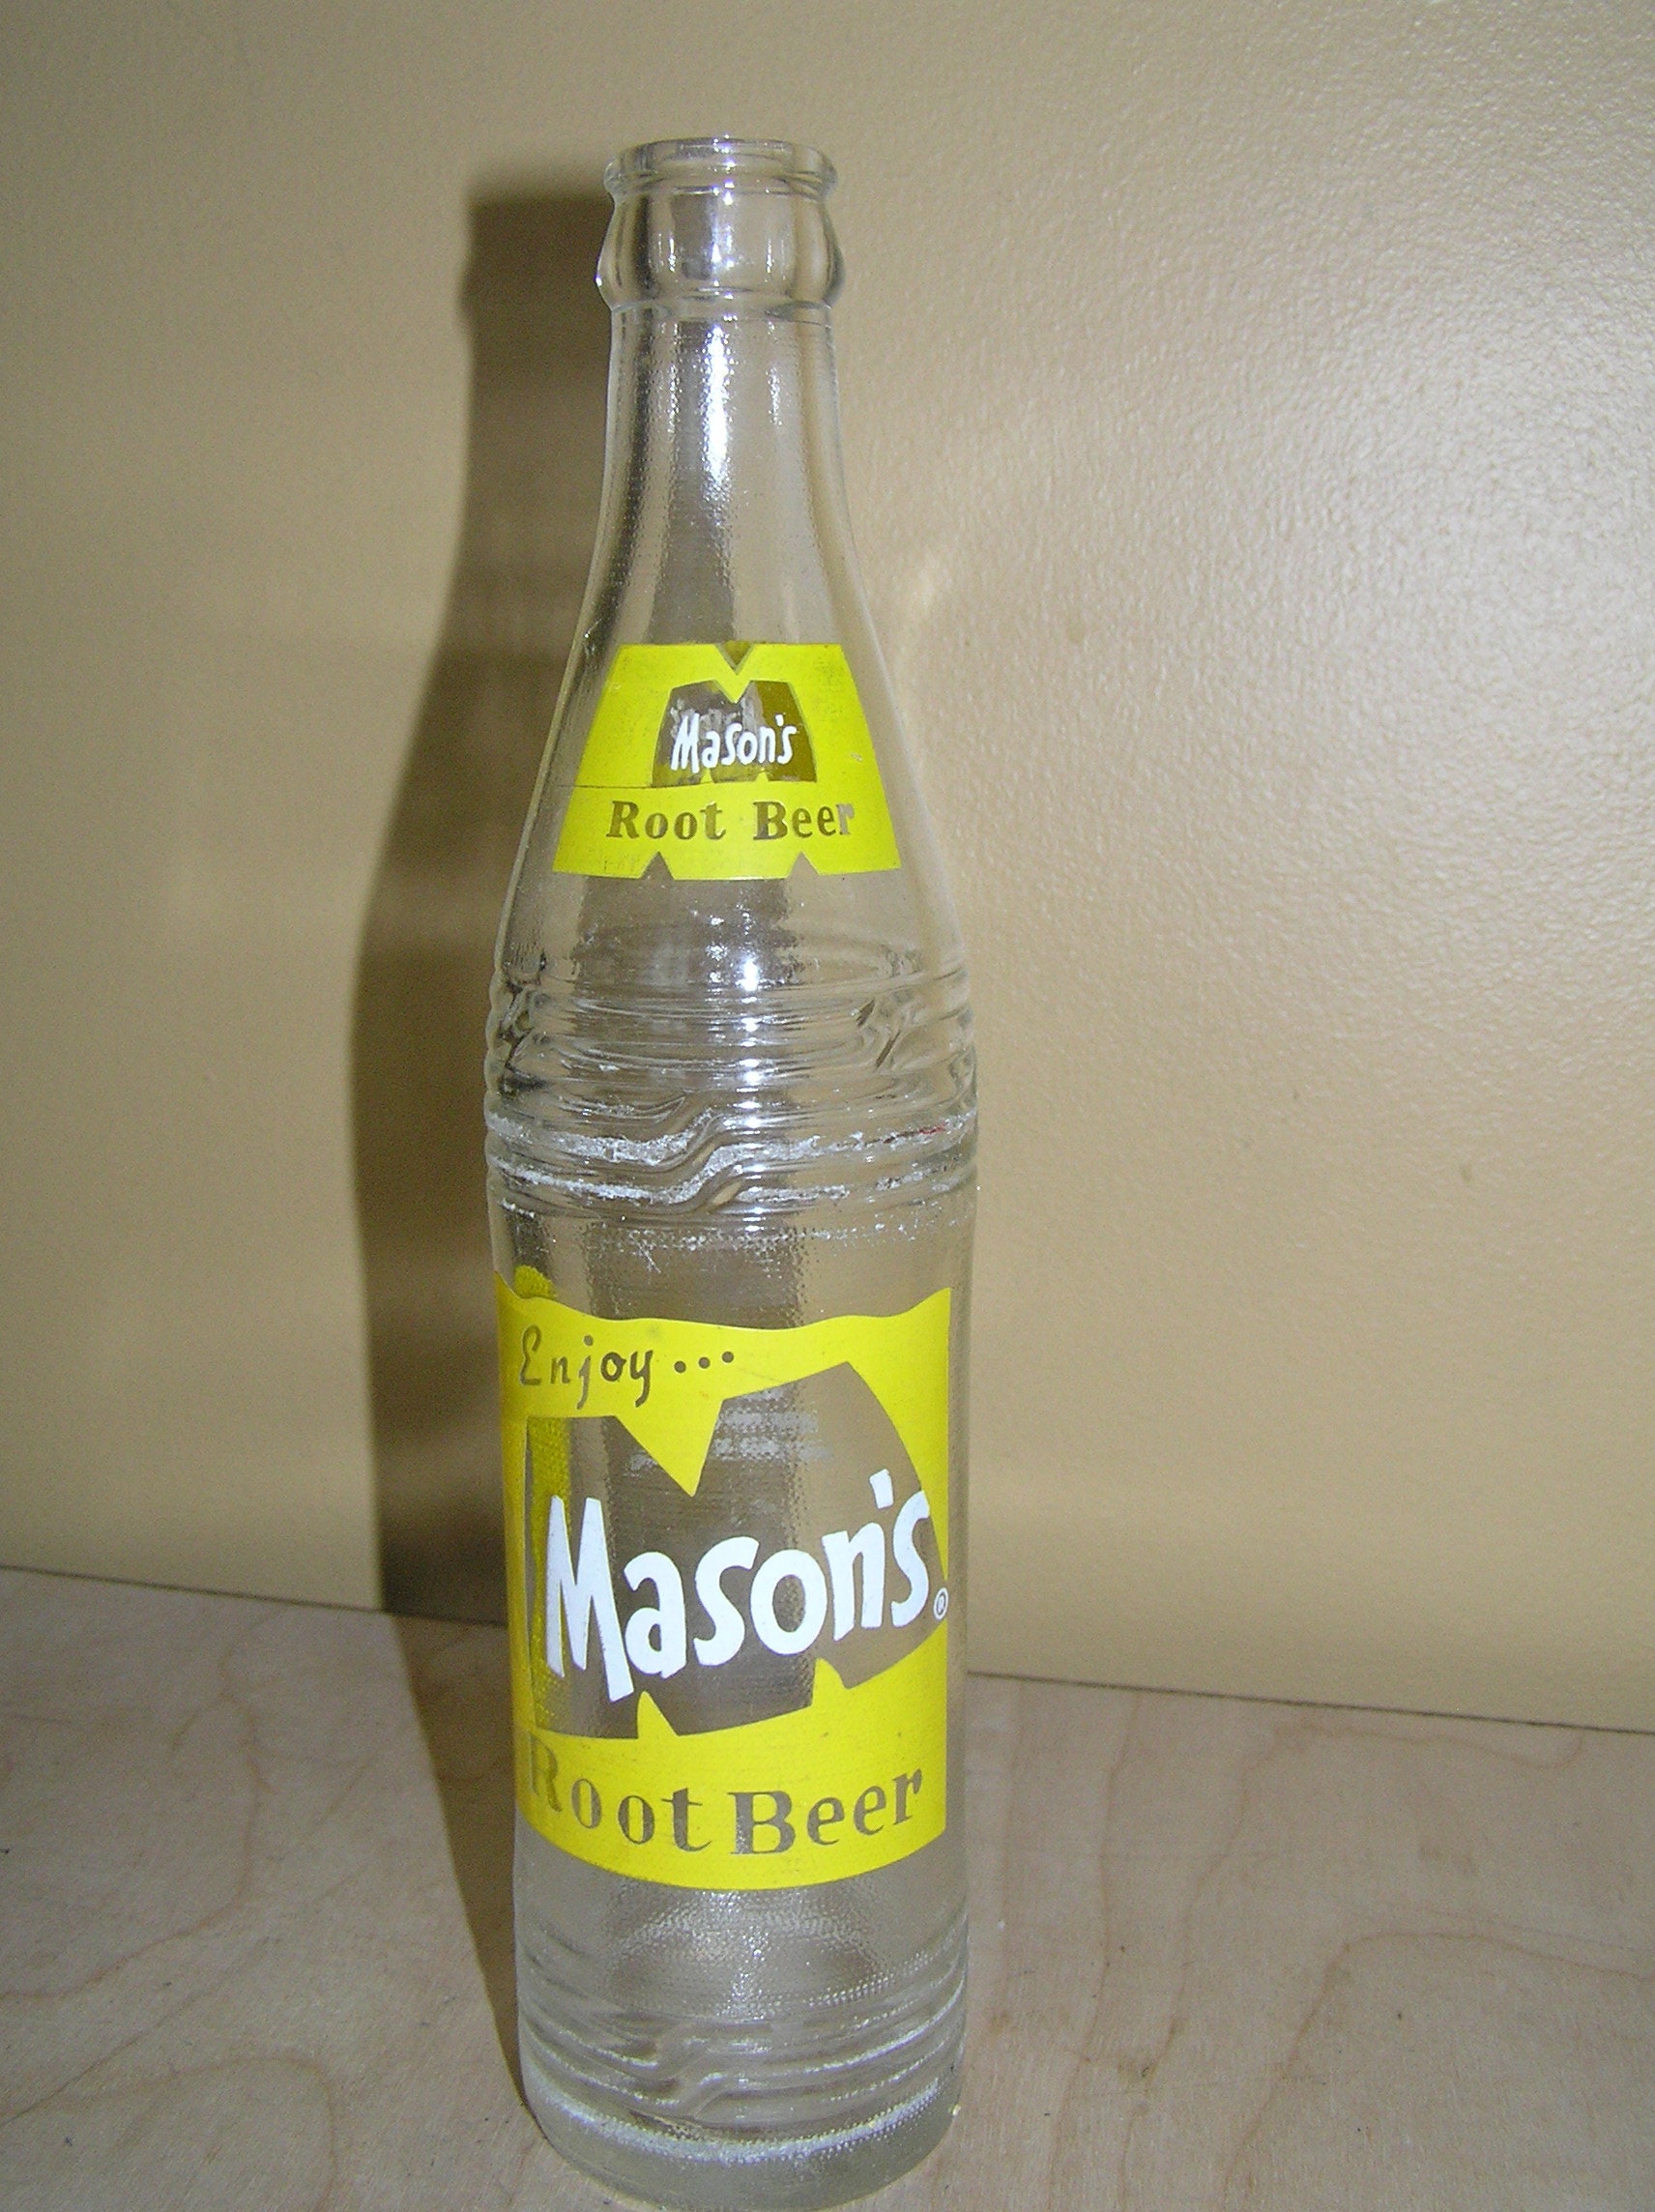 Vintage Mason's Old Fashioned Root Beer Glass Bottle 1950s